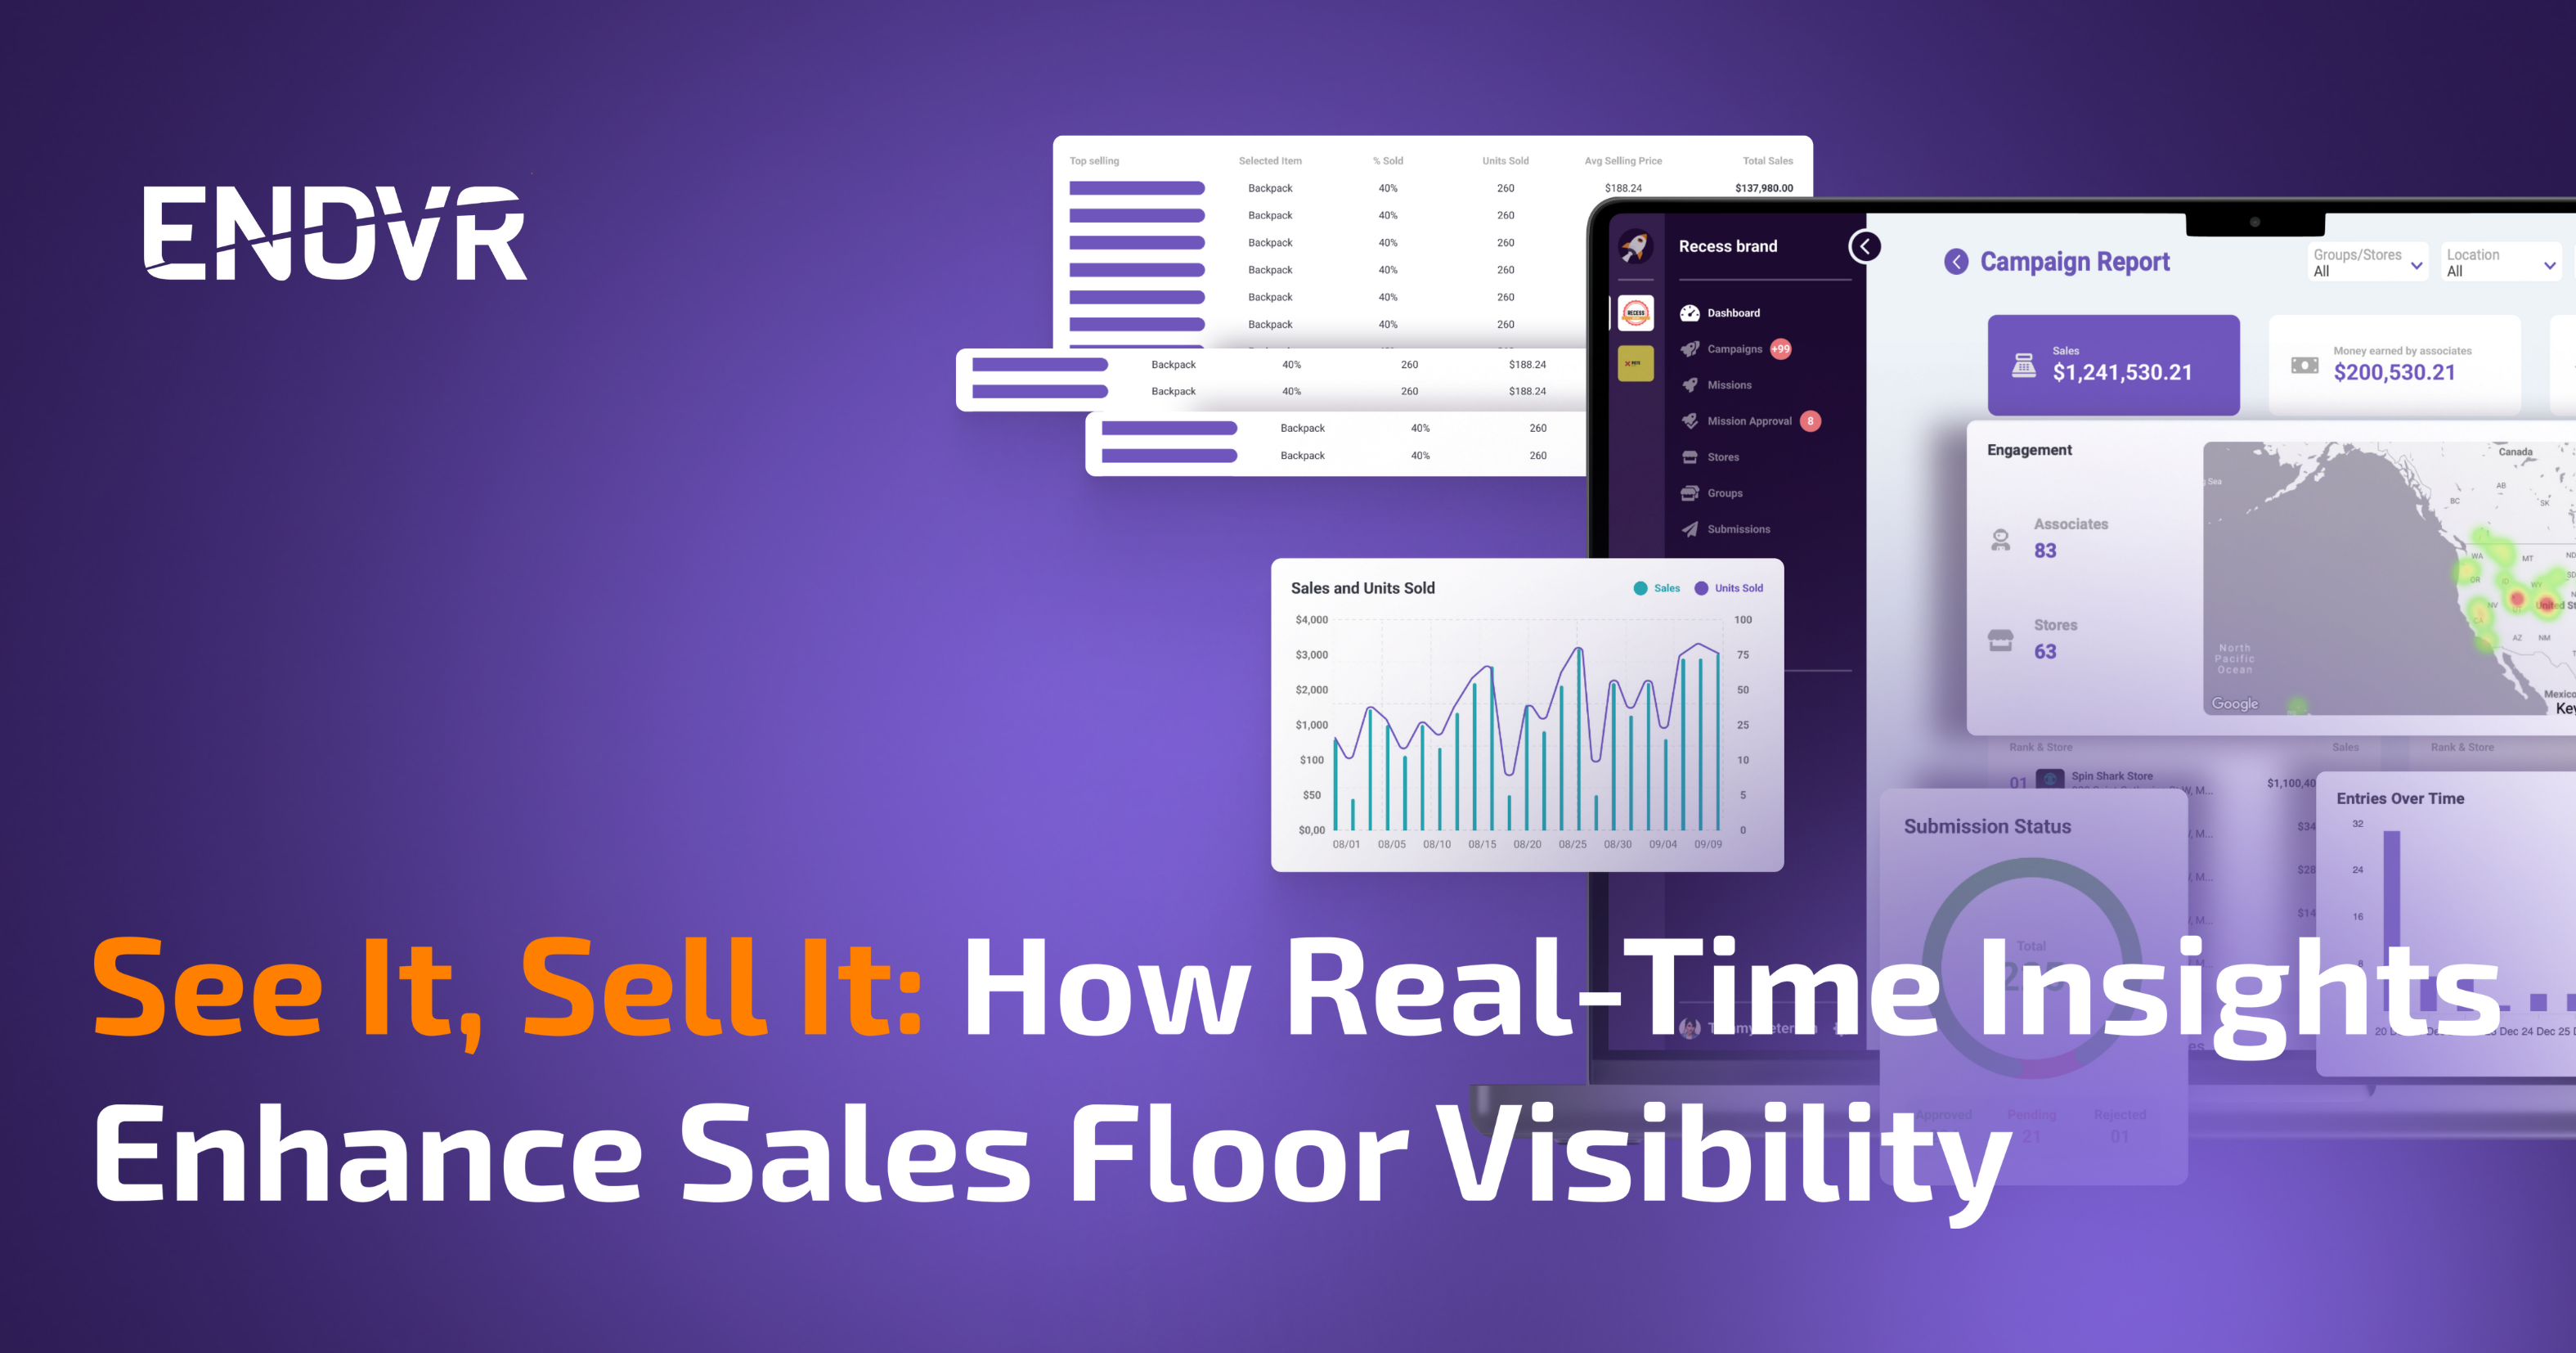 Lead image for the article: See It, Sell It: How Real-Time Insights Enhance Sales Floor Visibility